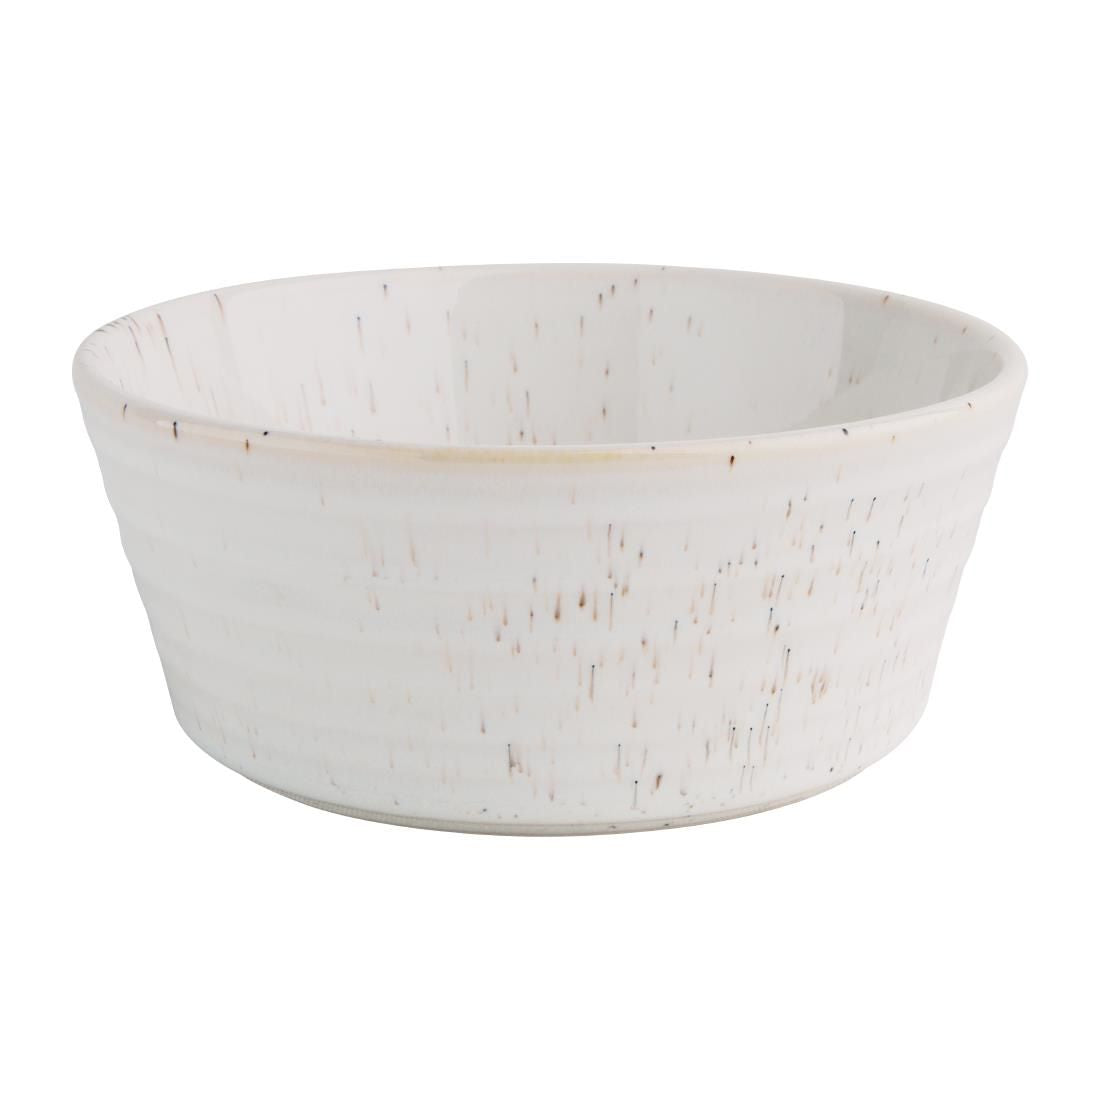 FD900 Olympia Cavolo Flat Round Bowls White Speckle 143mm (Pack of 6) JD Catering Equipment Solutions Ltd